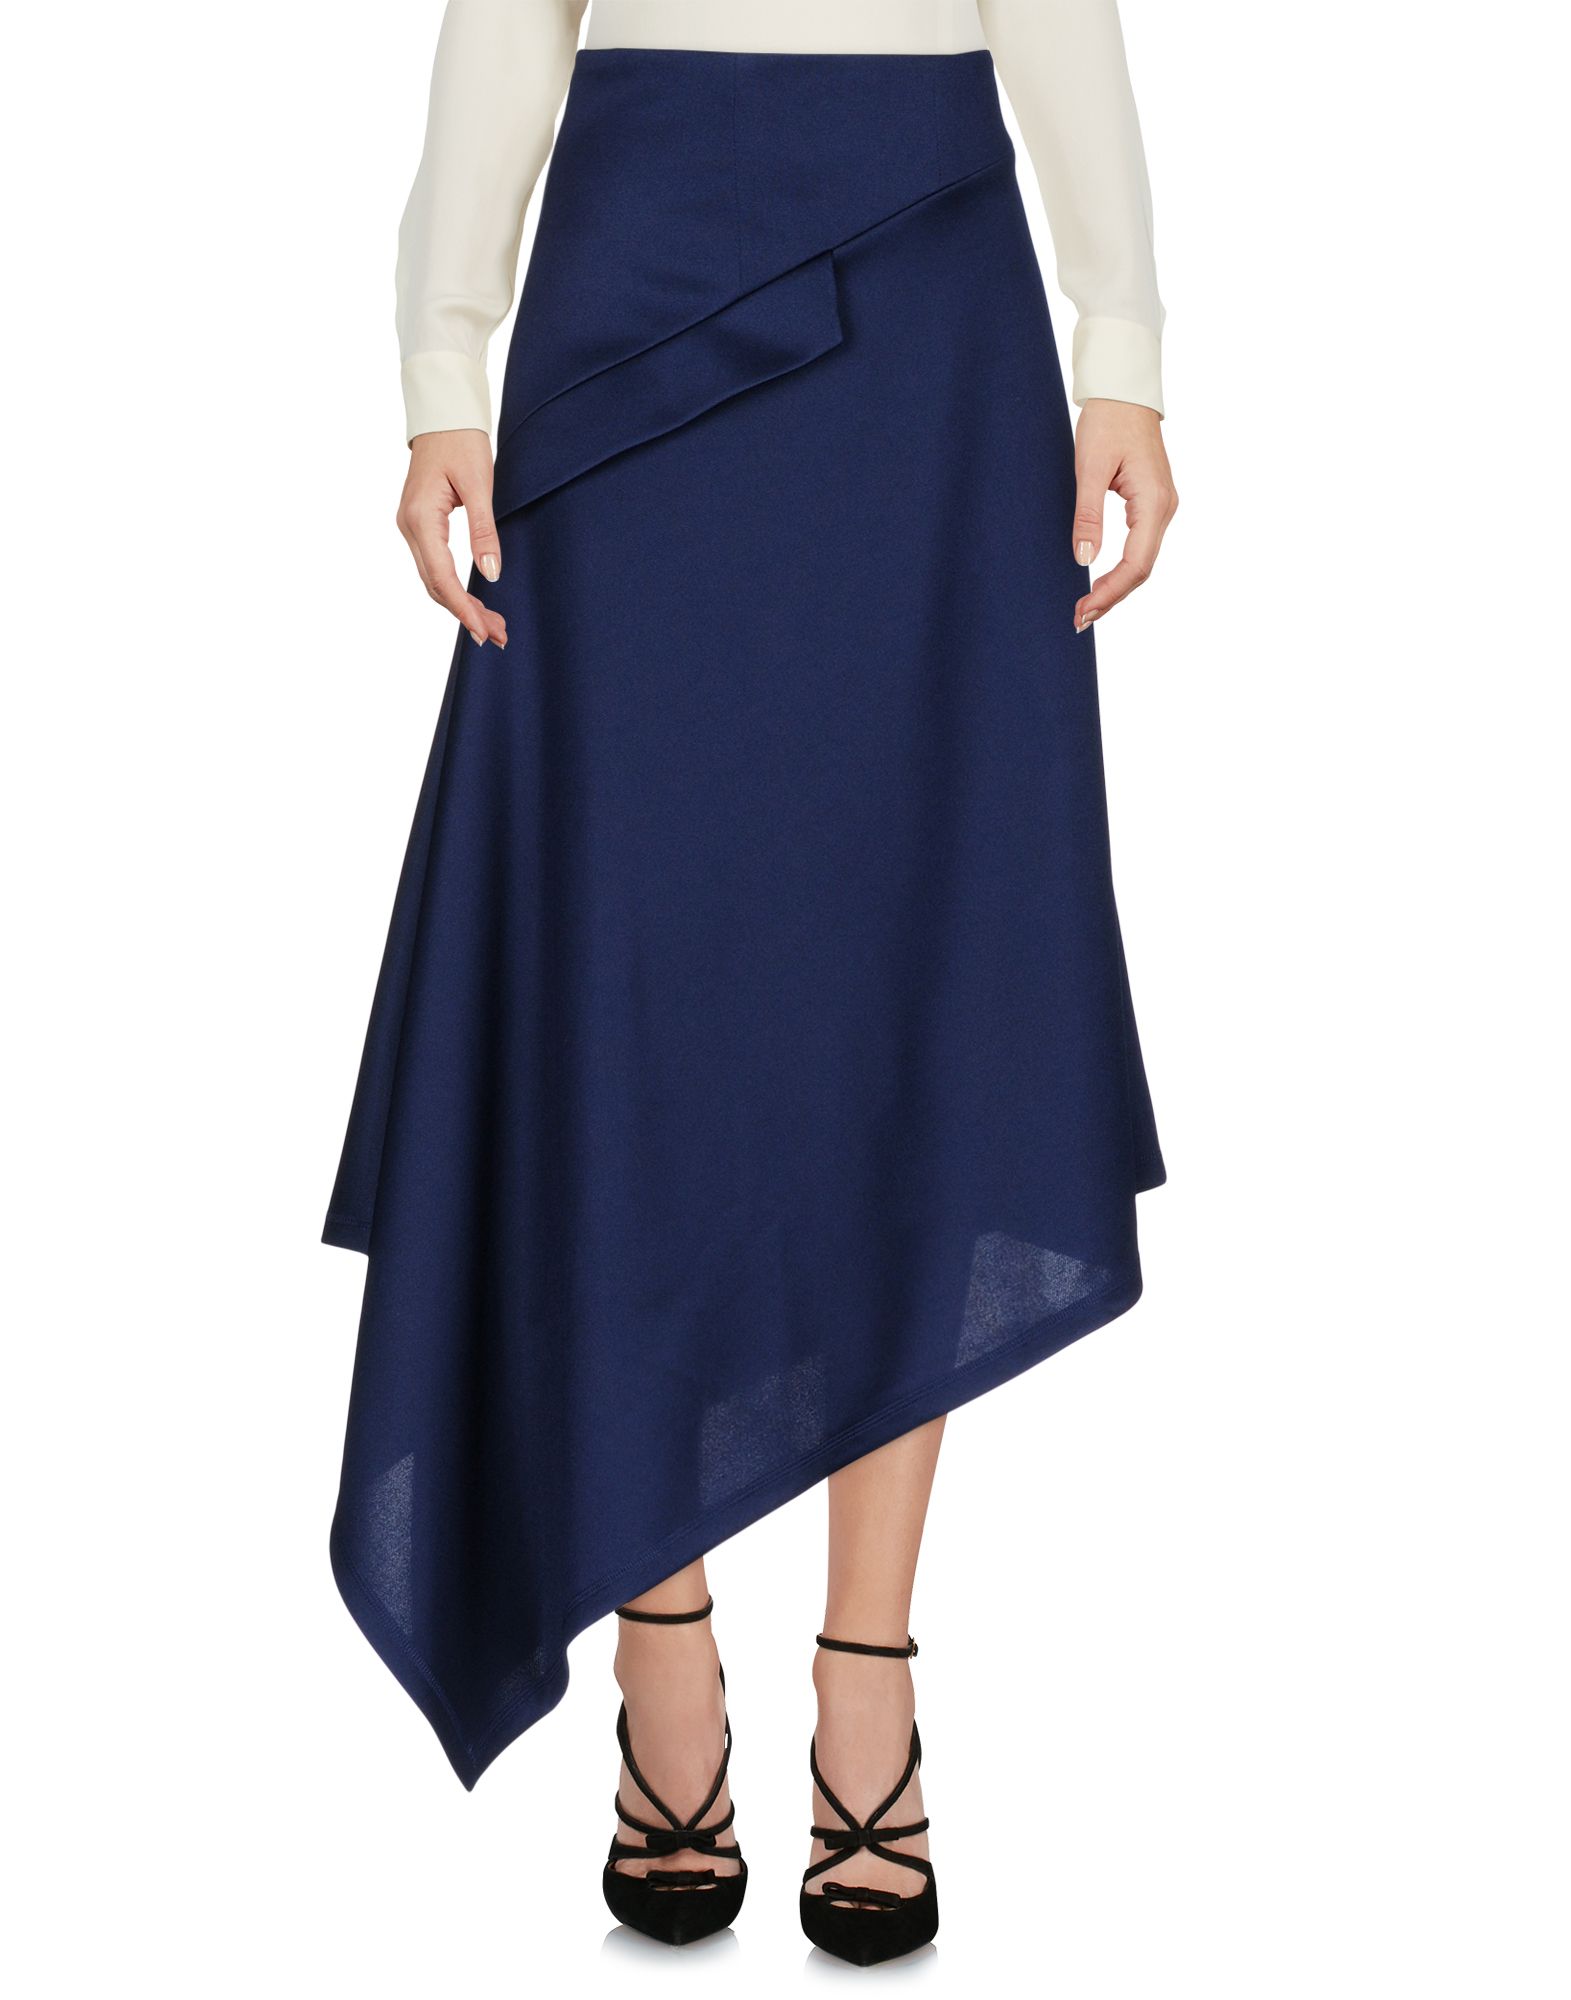 JW ANDERSON JW ANDERSON WOMAN MIDI SKIRT MIDNIGHT BLUE SIZE 6 POLYESTER,35373918MB 4